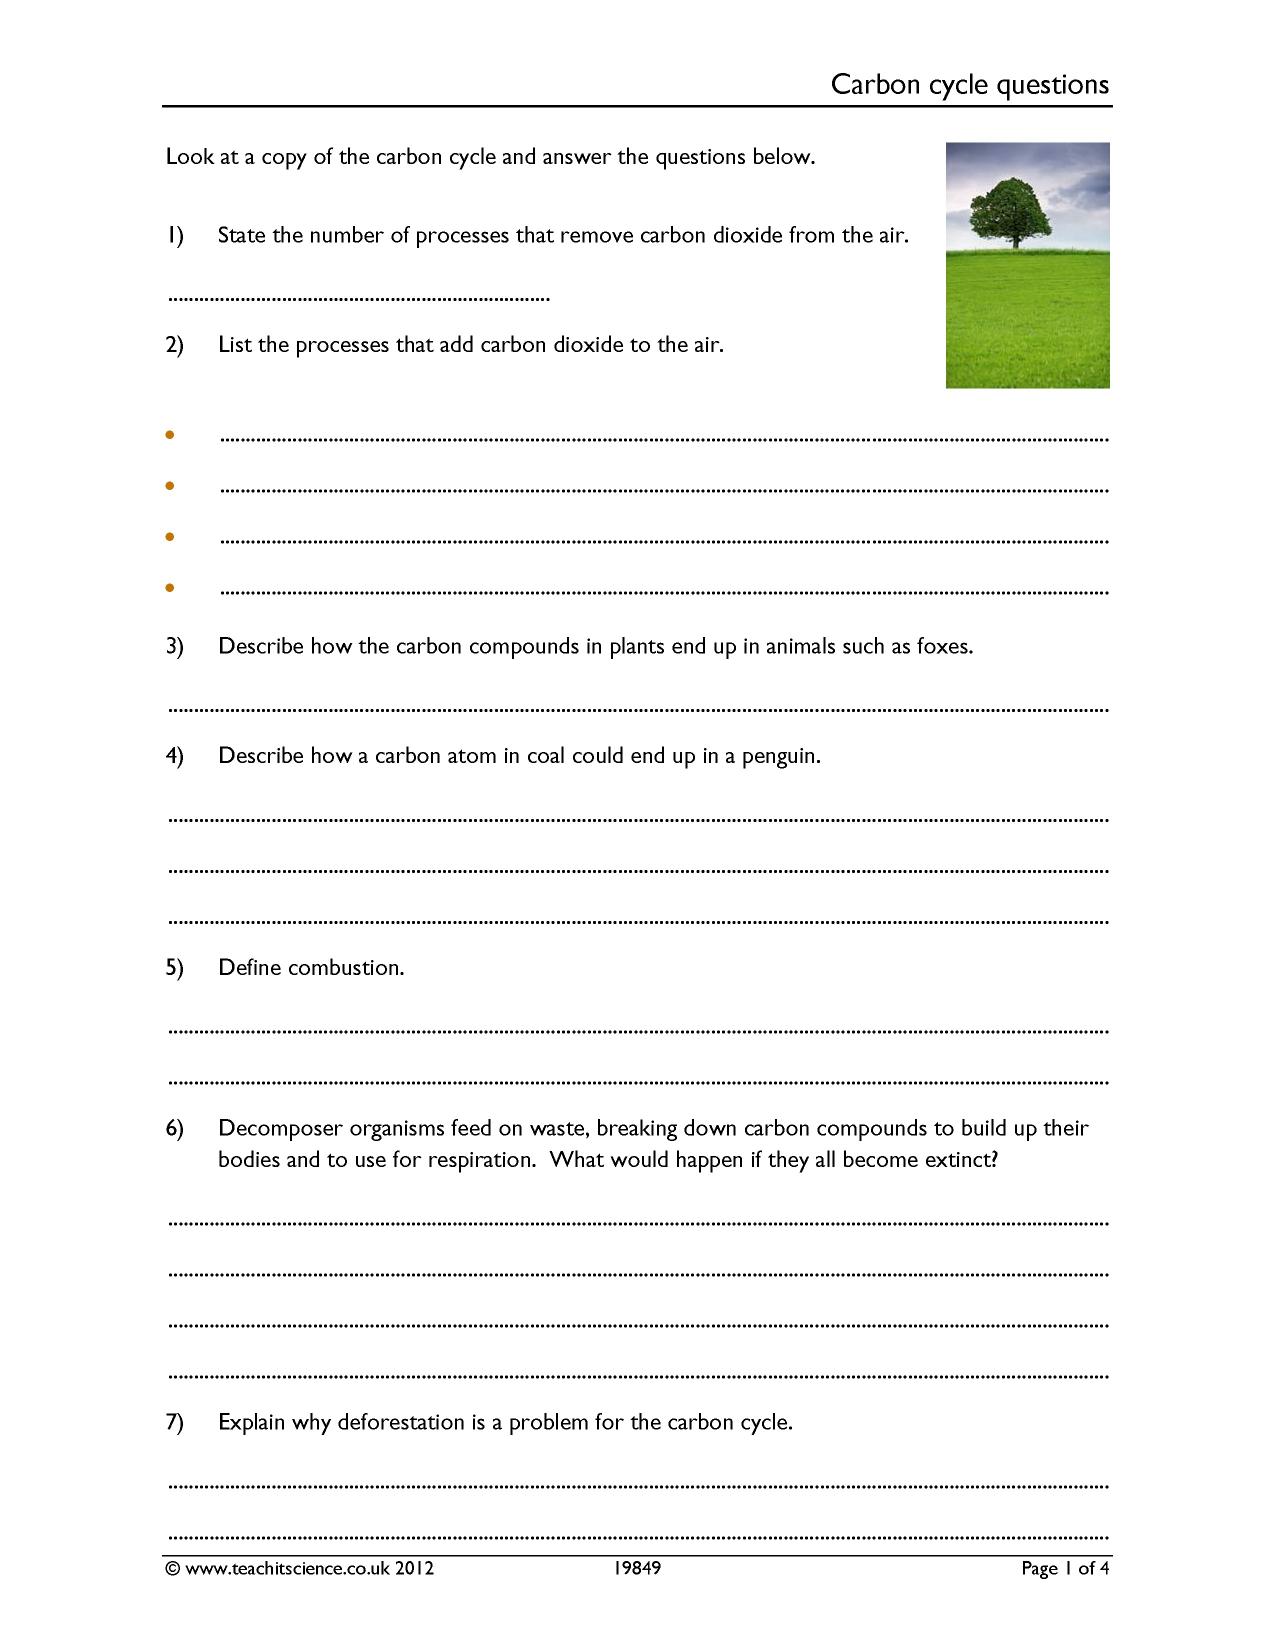 Carbon cycle questions worksheet [pdf] - Teachit Science Throughout Carbon Cycle Worksheet Answers